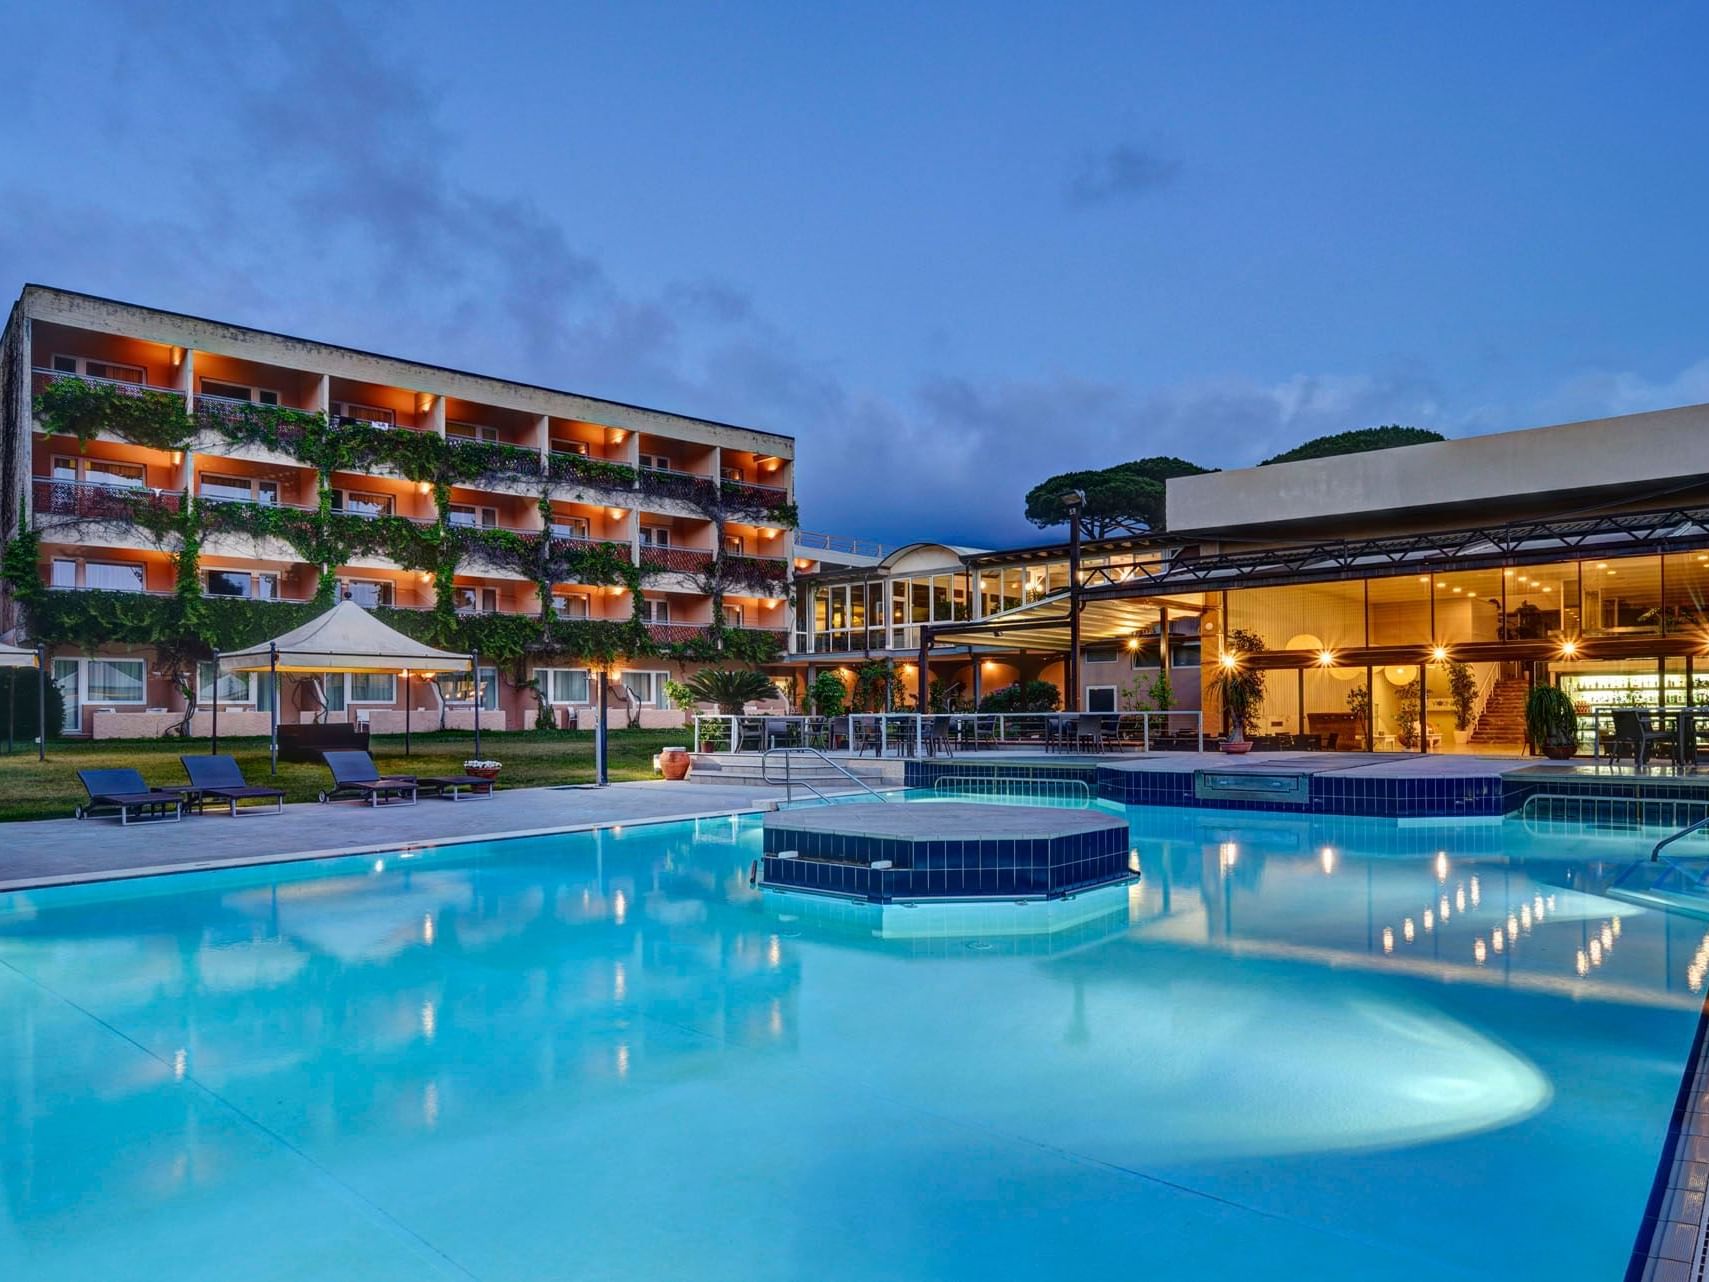 Outdoor pool & exterior view of Golf Hotel Punta Ala